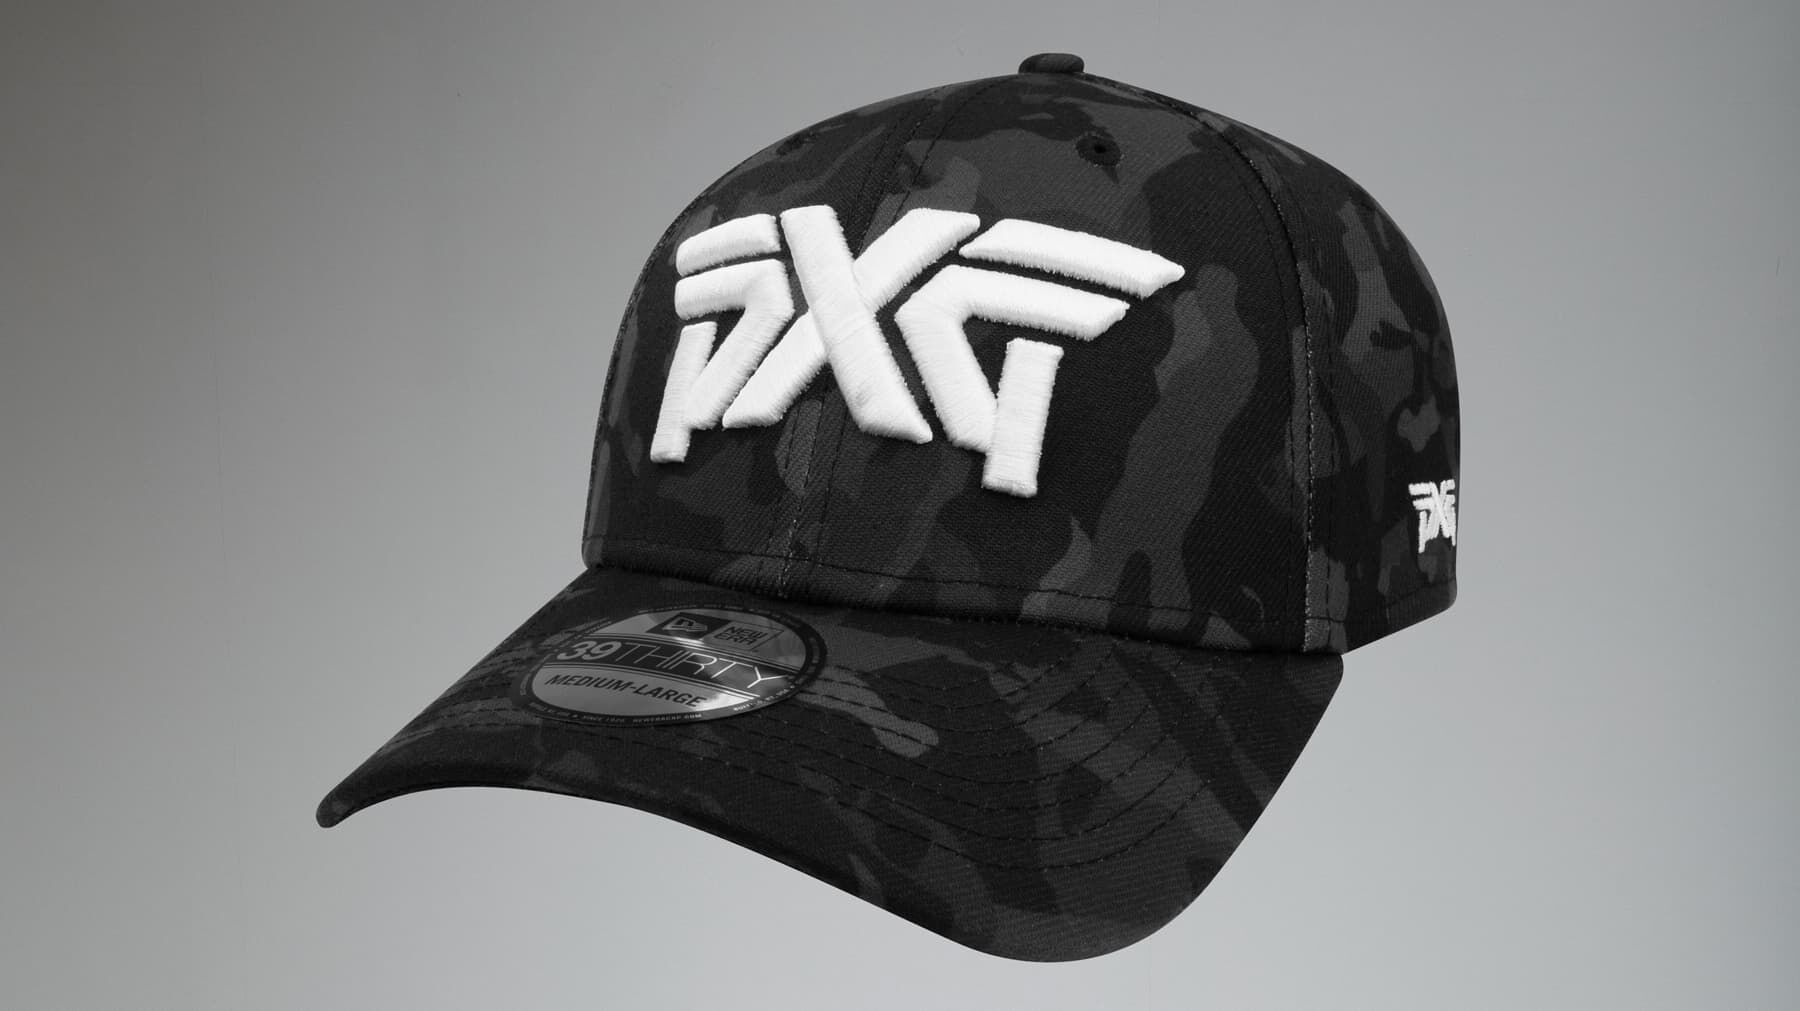 Fairway Camo 39THIRTY Stretch Fit Cap Shop the Highest Quality Golf Apparel, Gear, Accessories and Golf Clubs at PXG